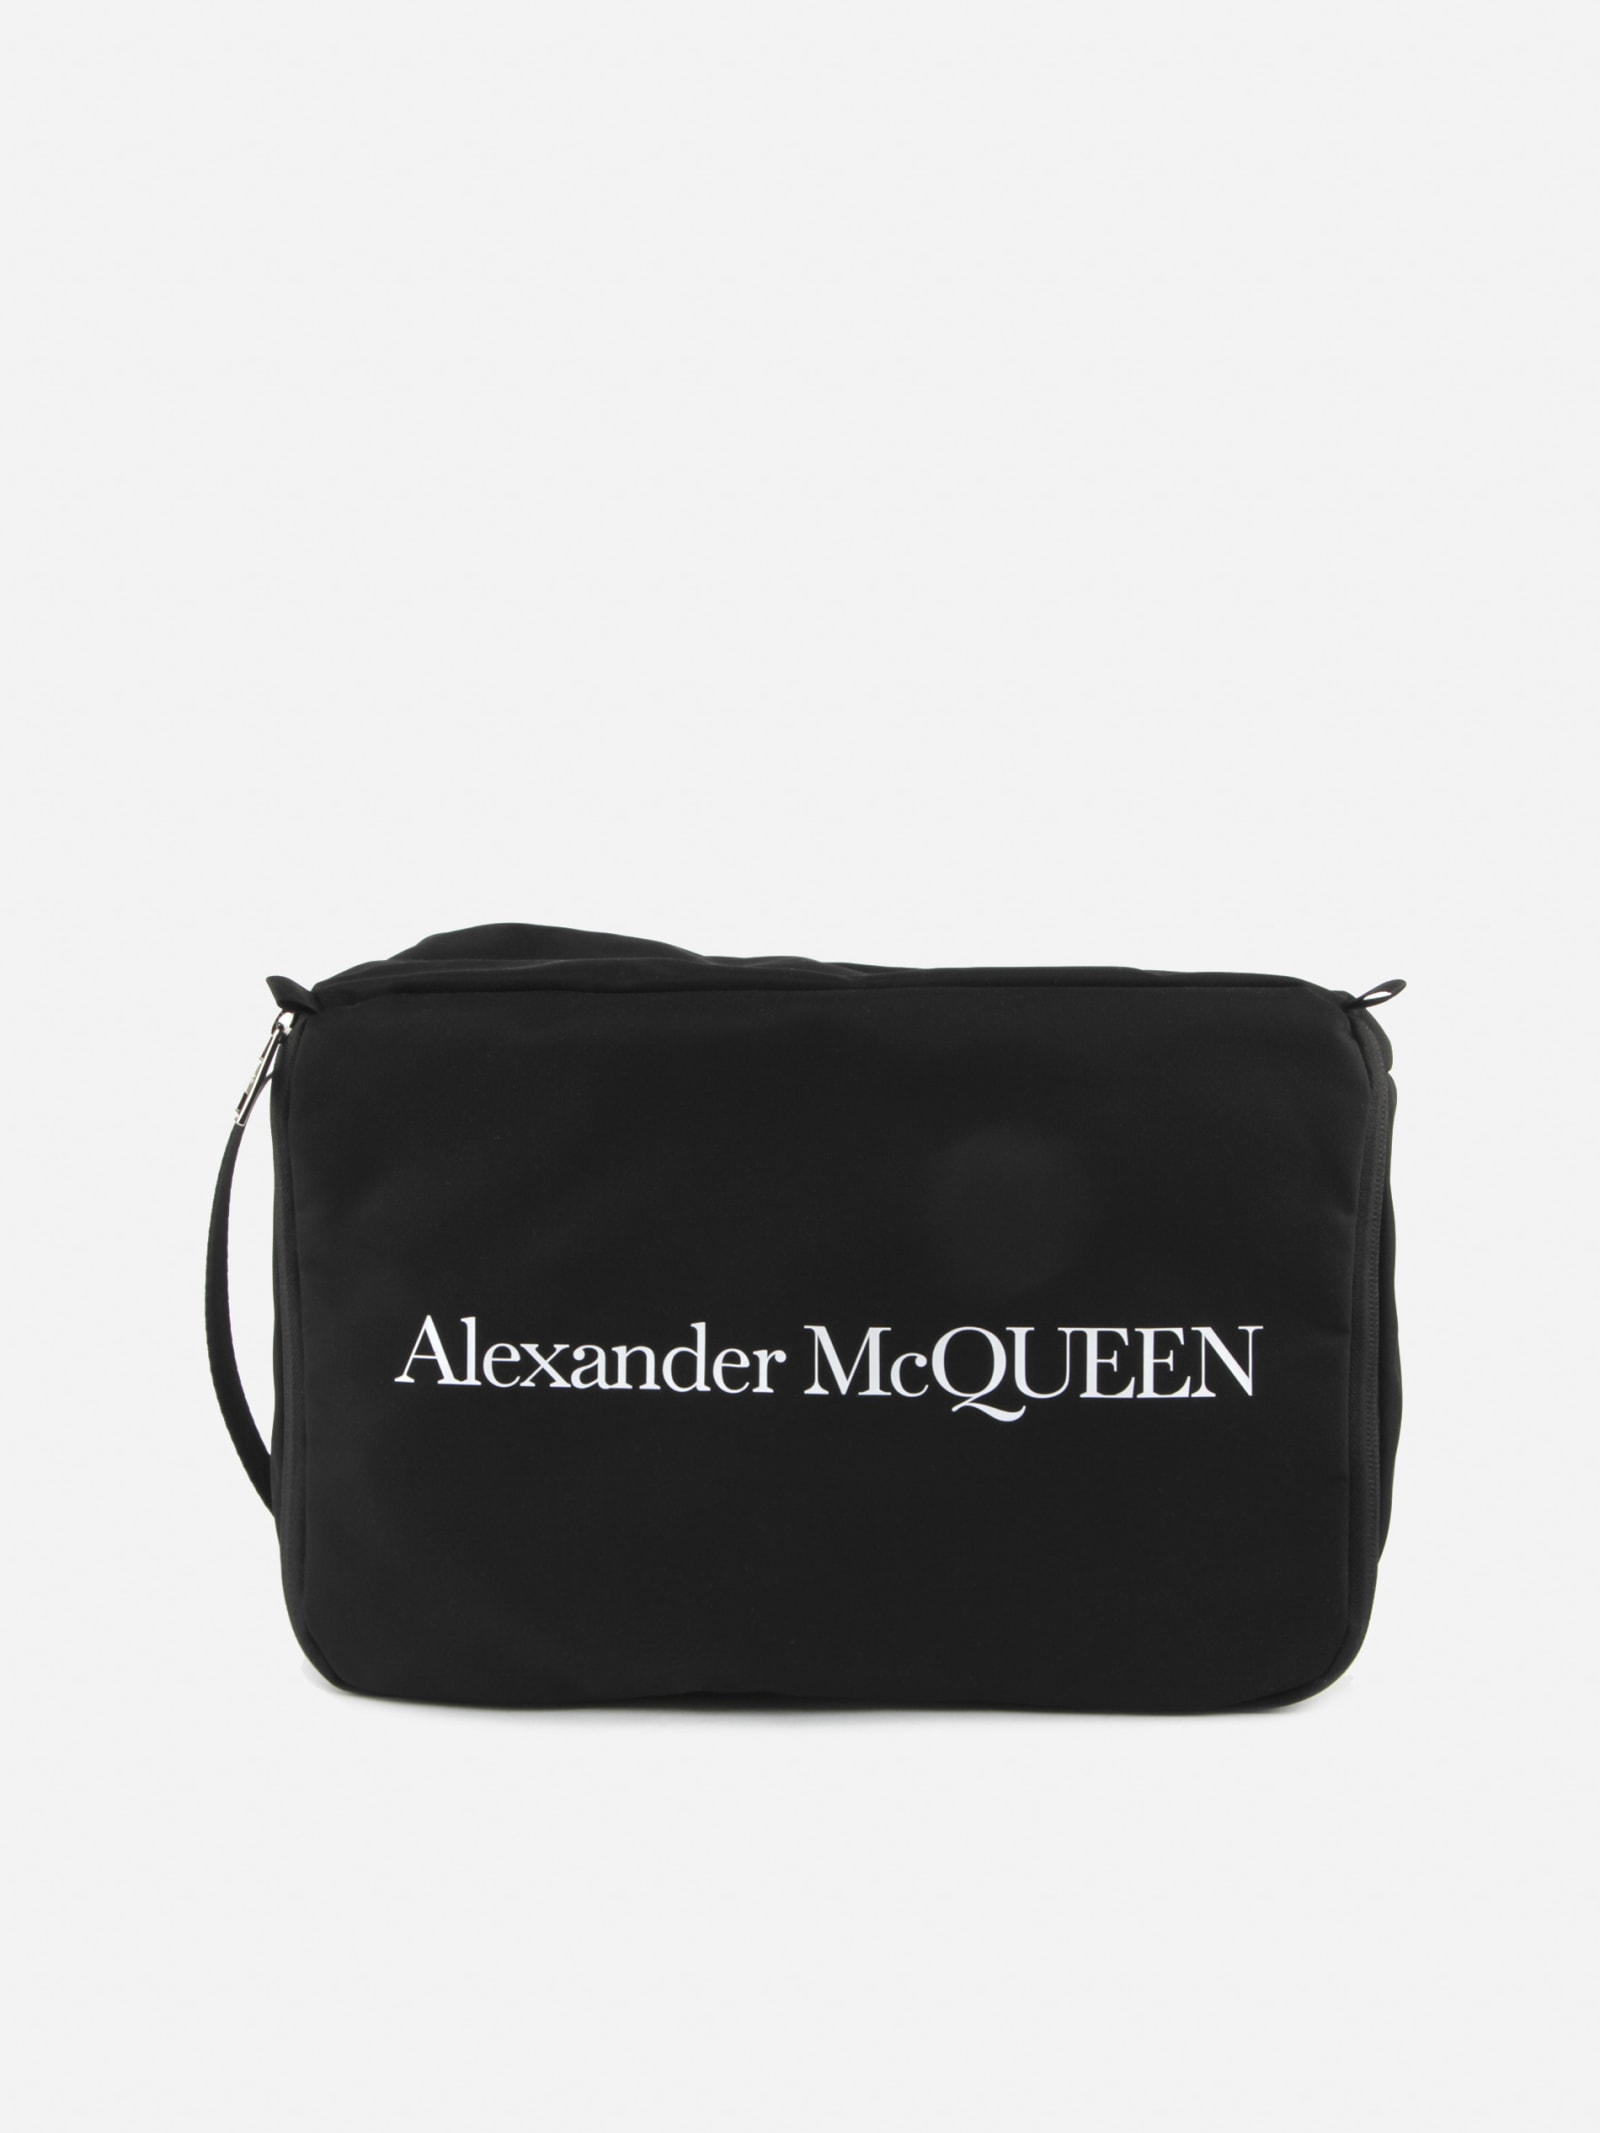 Alexander McQueen Travel Toiletry Bag With Contrasting Logo